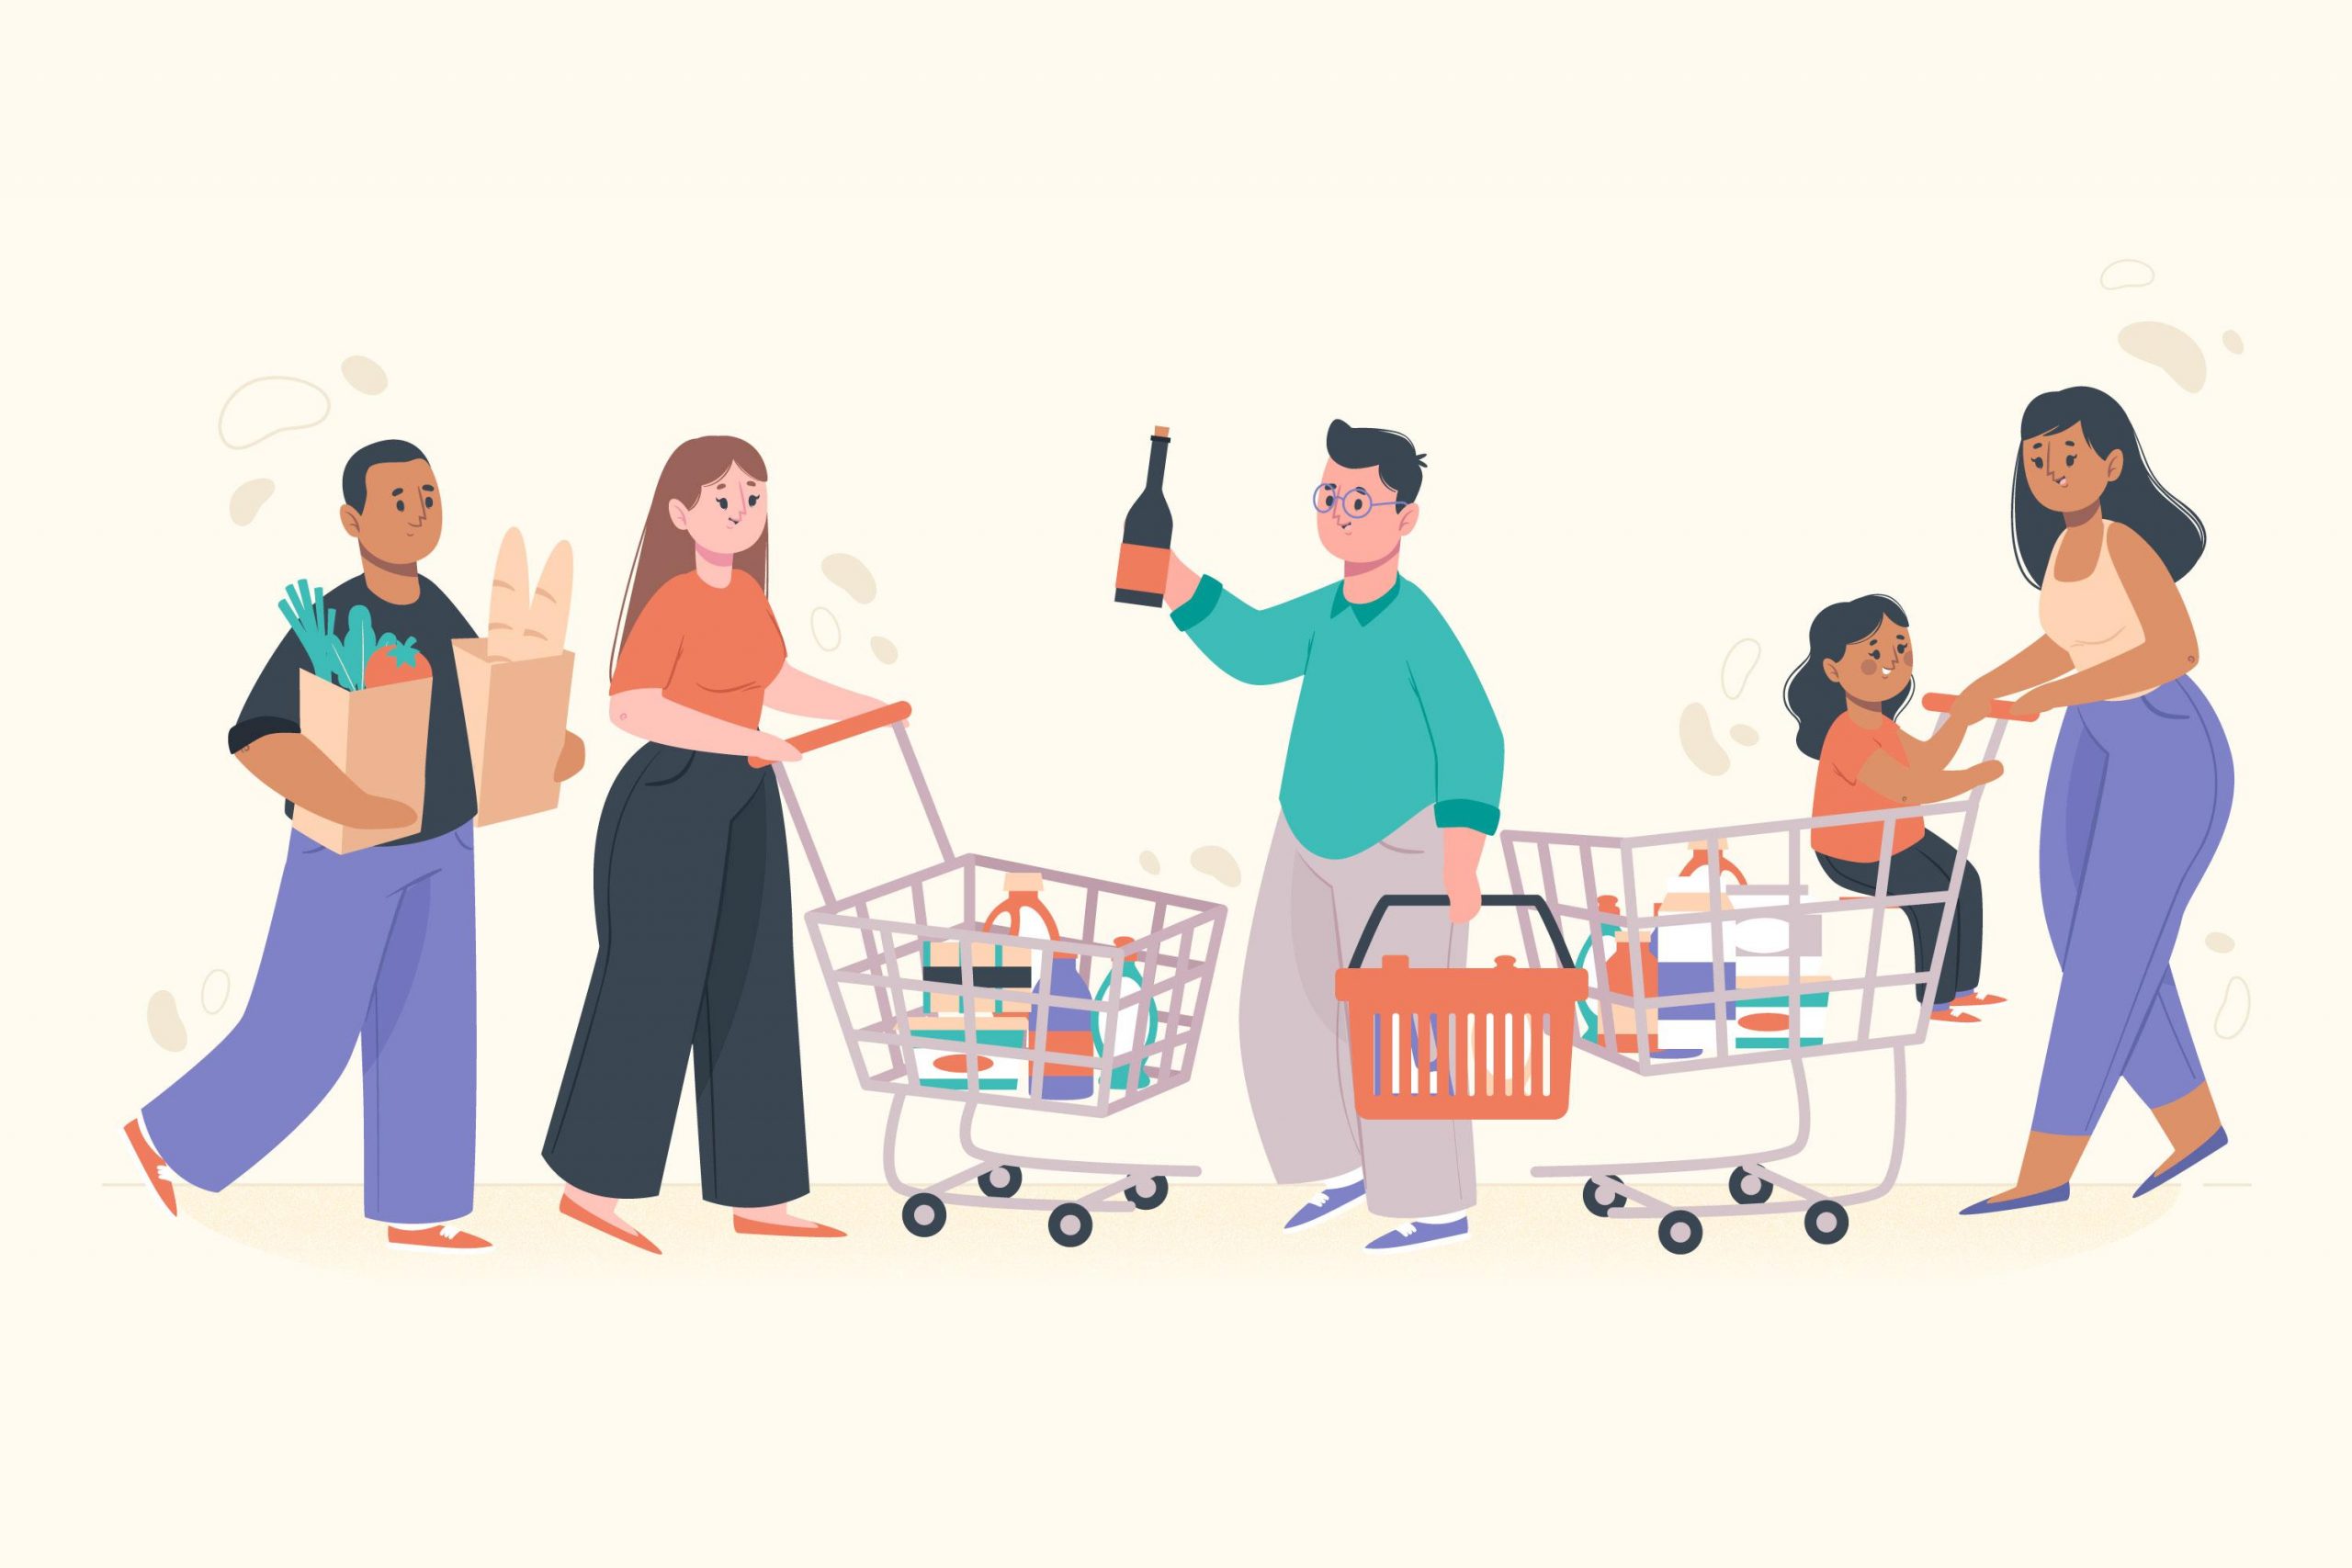 Five individuals grocery shop, pushing grocery carts and holding shopping baskets or paper bags